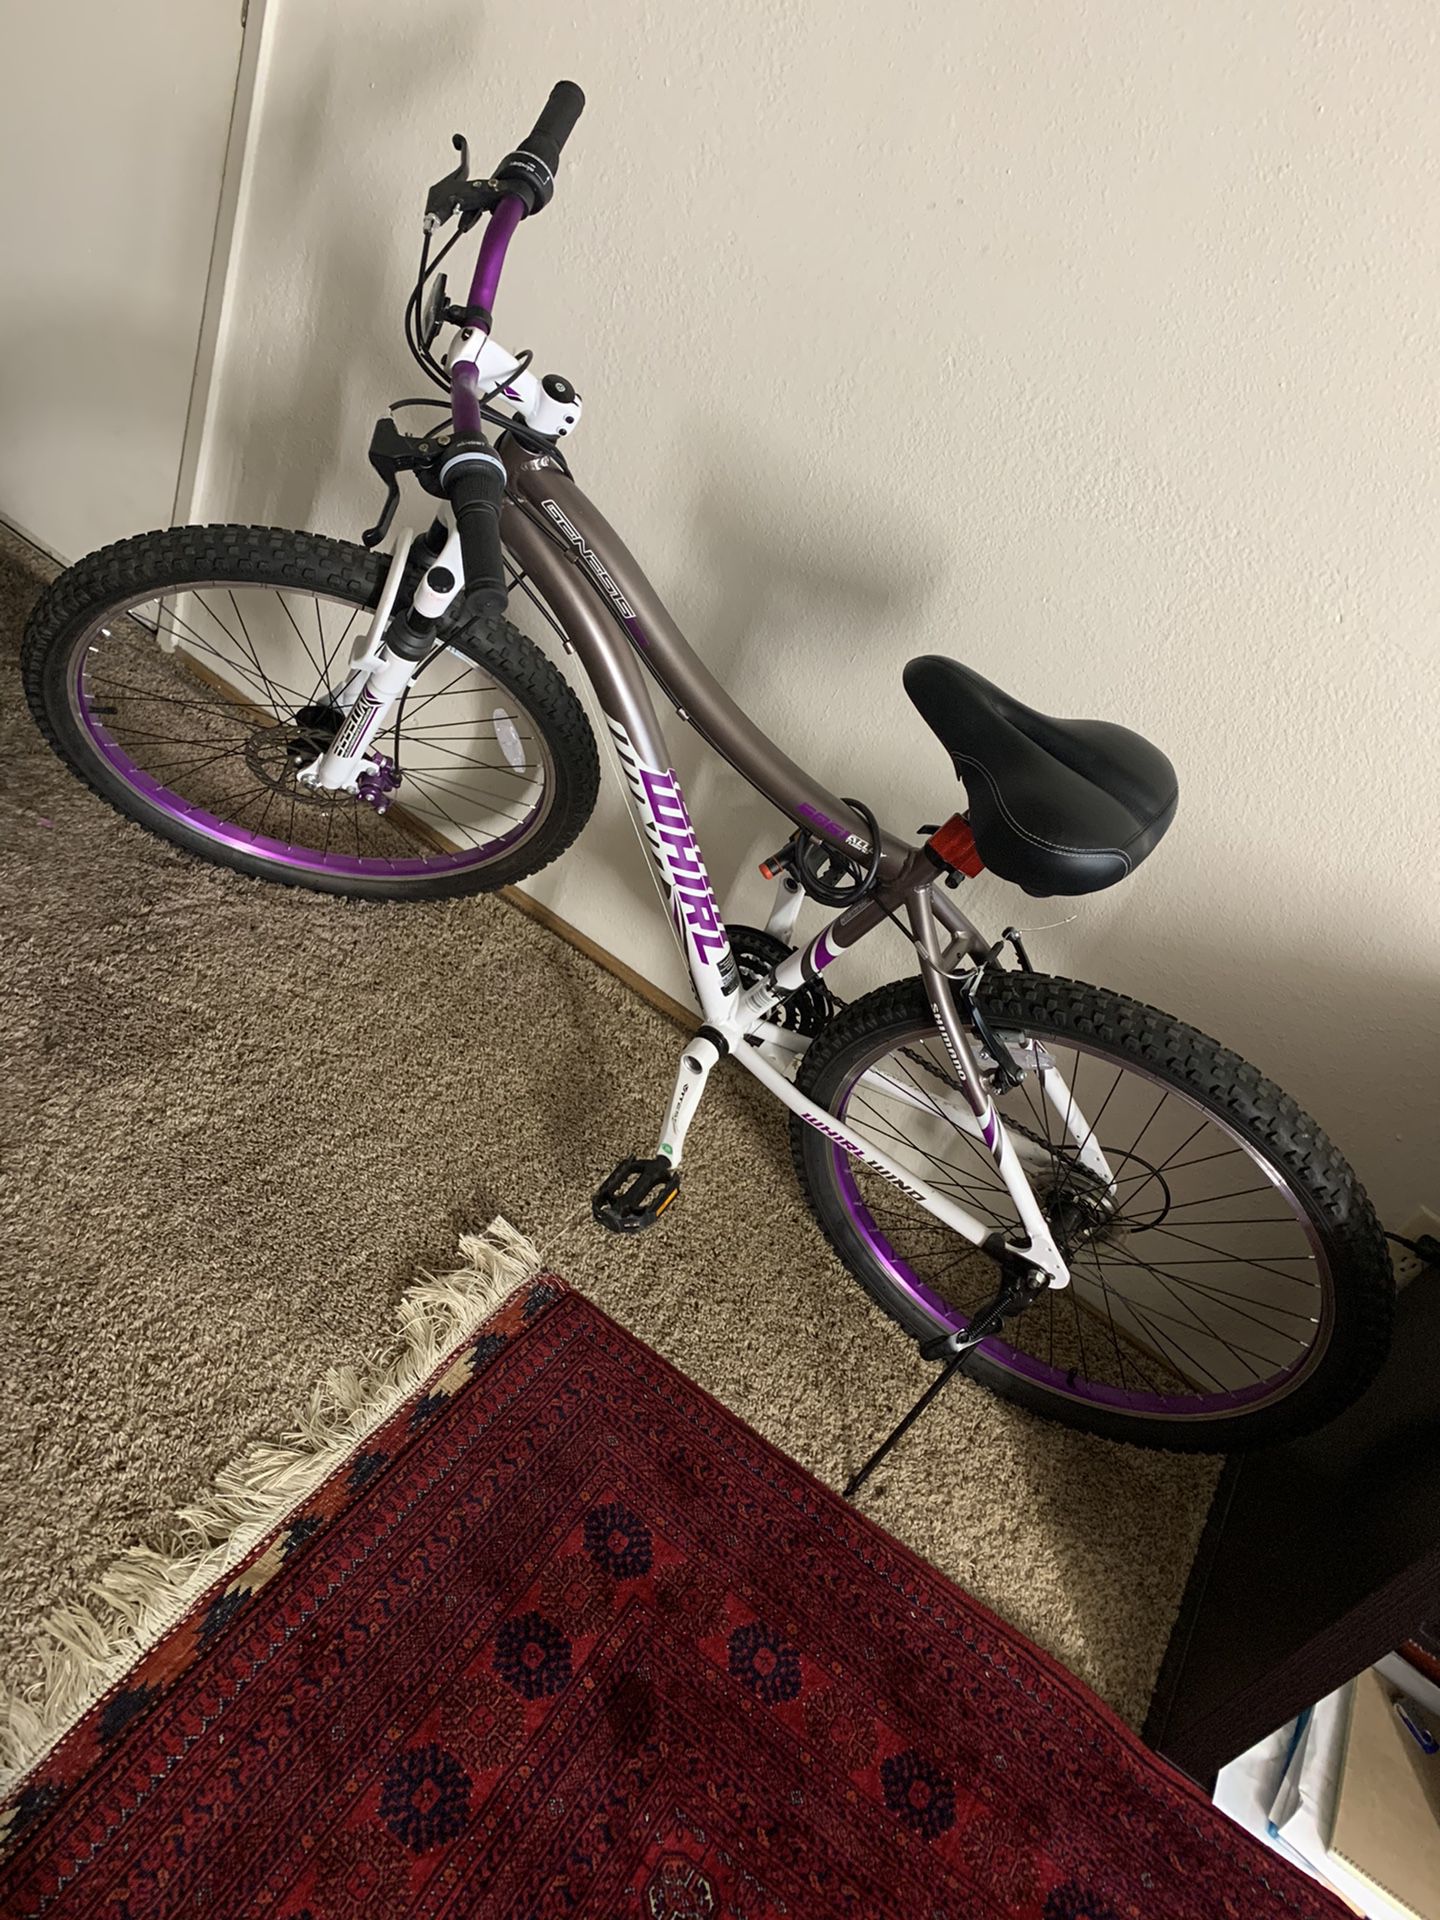 Bike brand new two month used